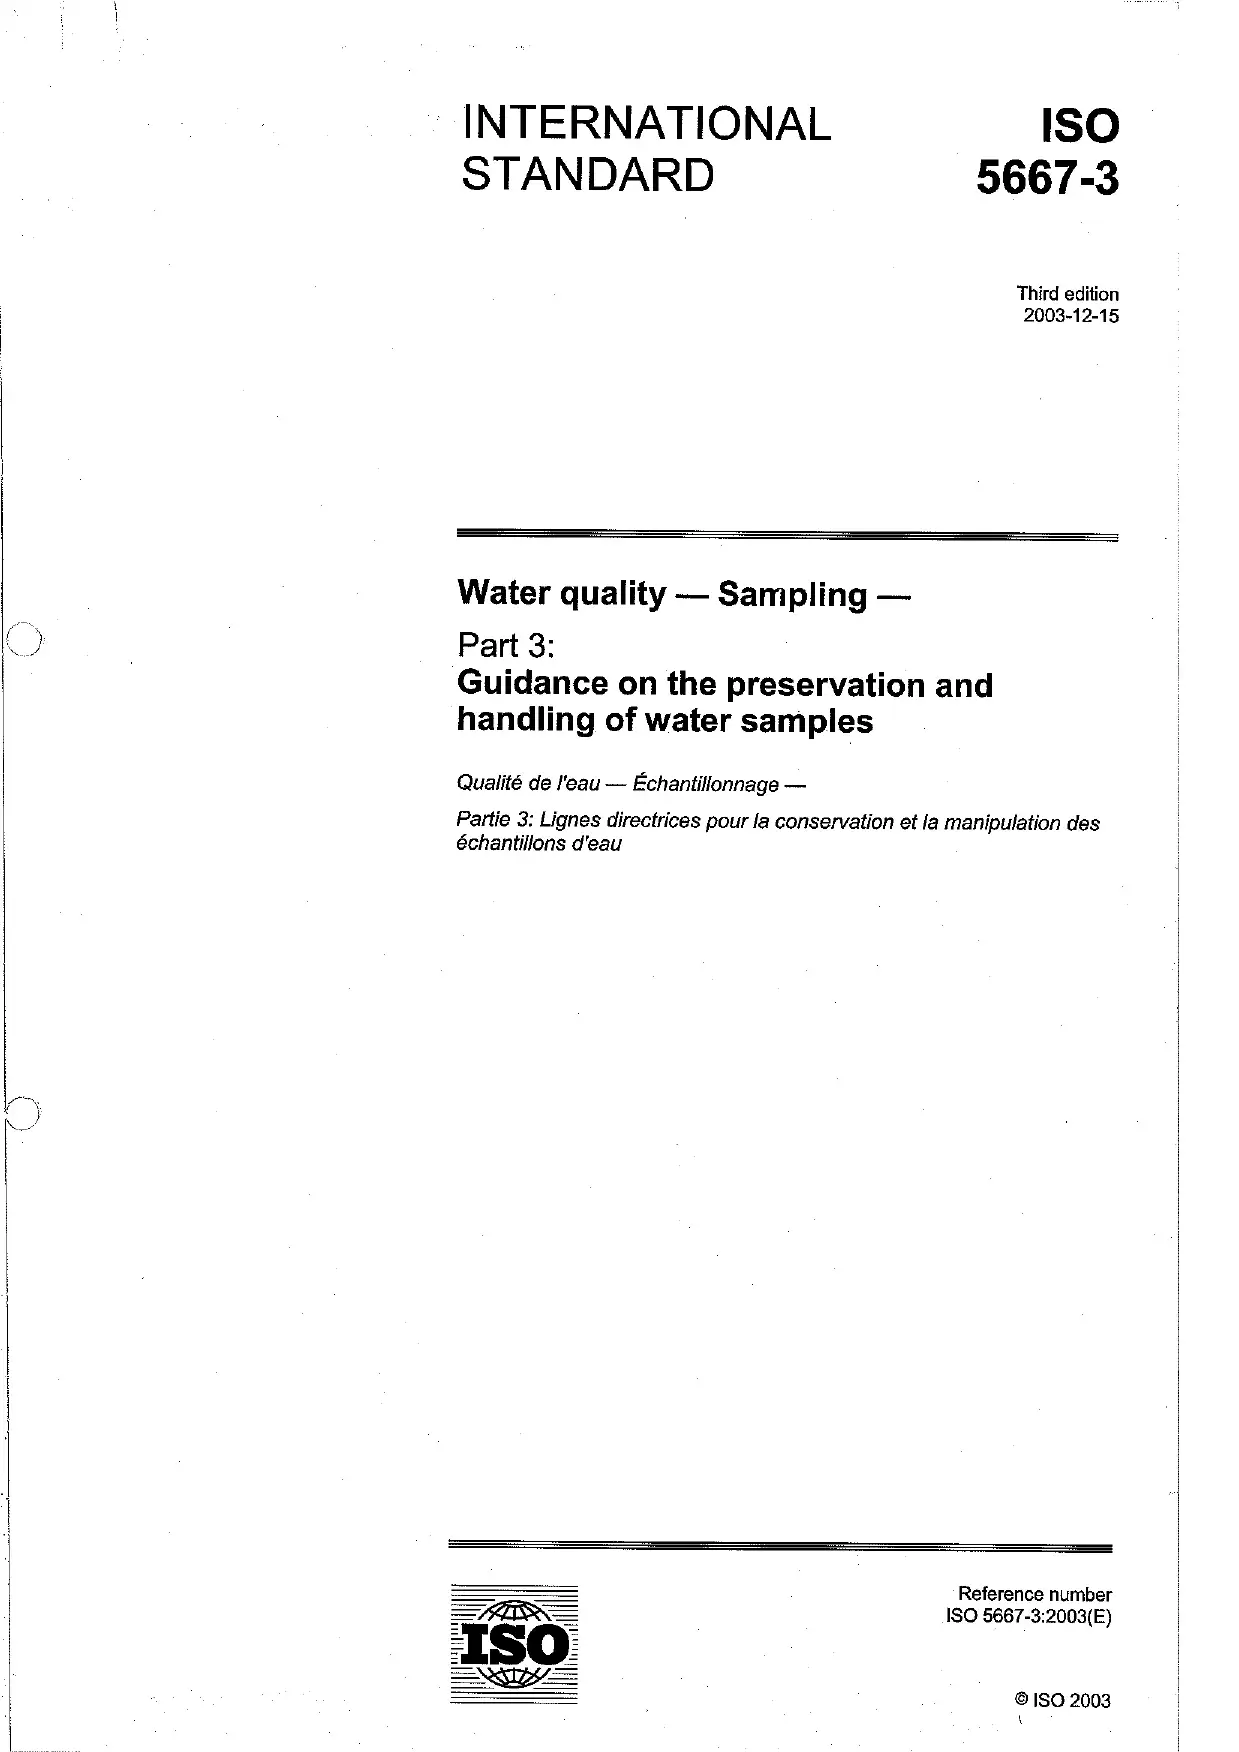 Water Quality - Sampling - Part 3 : Guidance on The Preservation and Handling of Water Samples